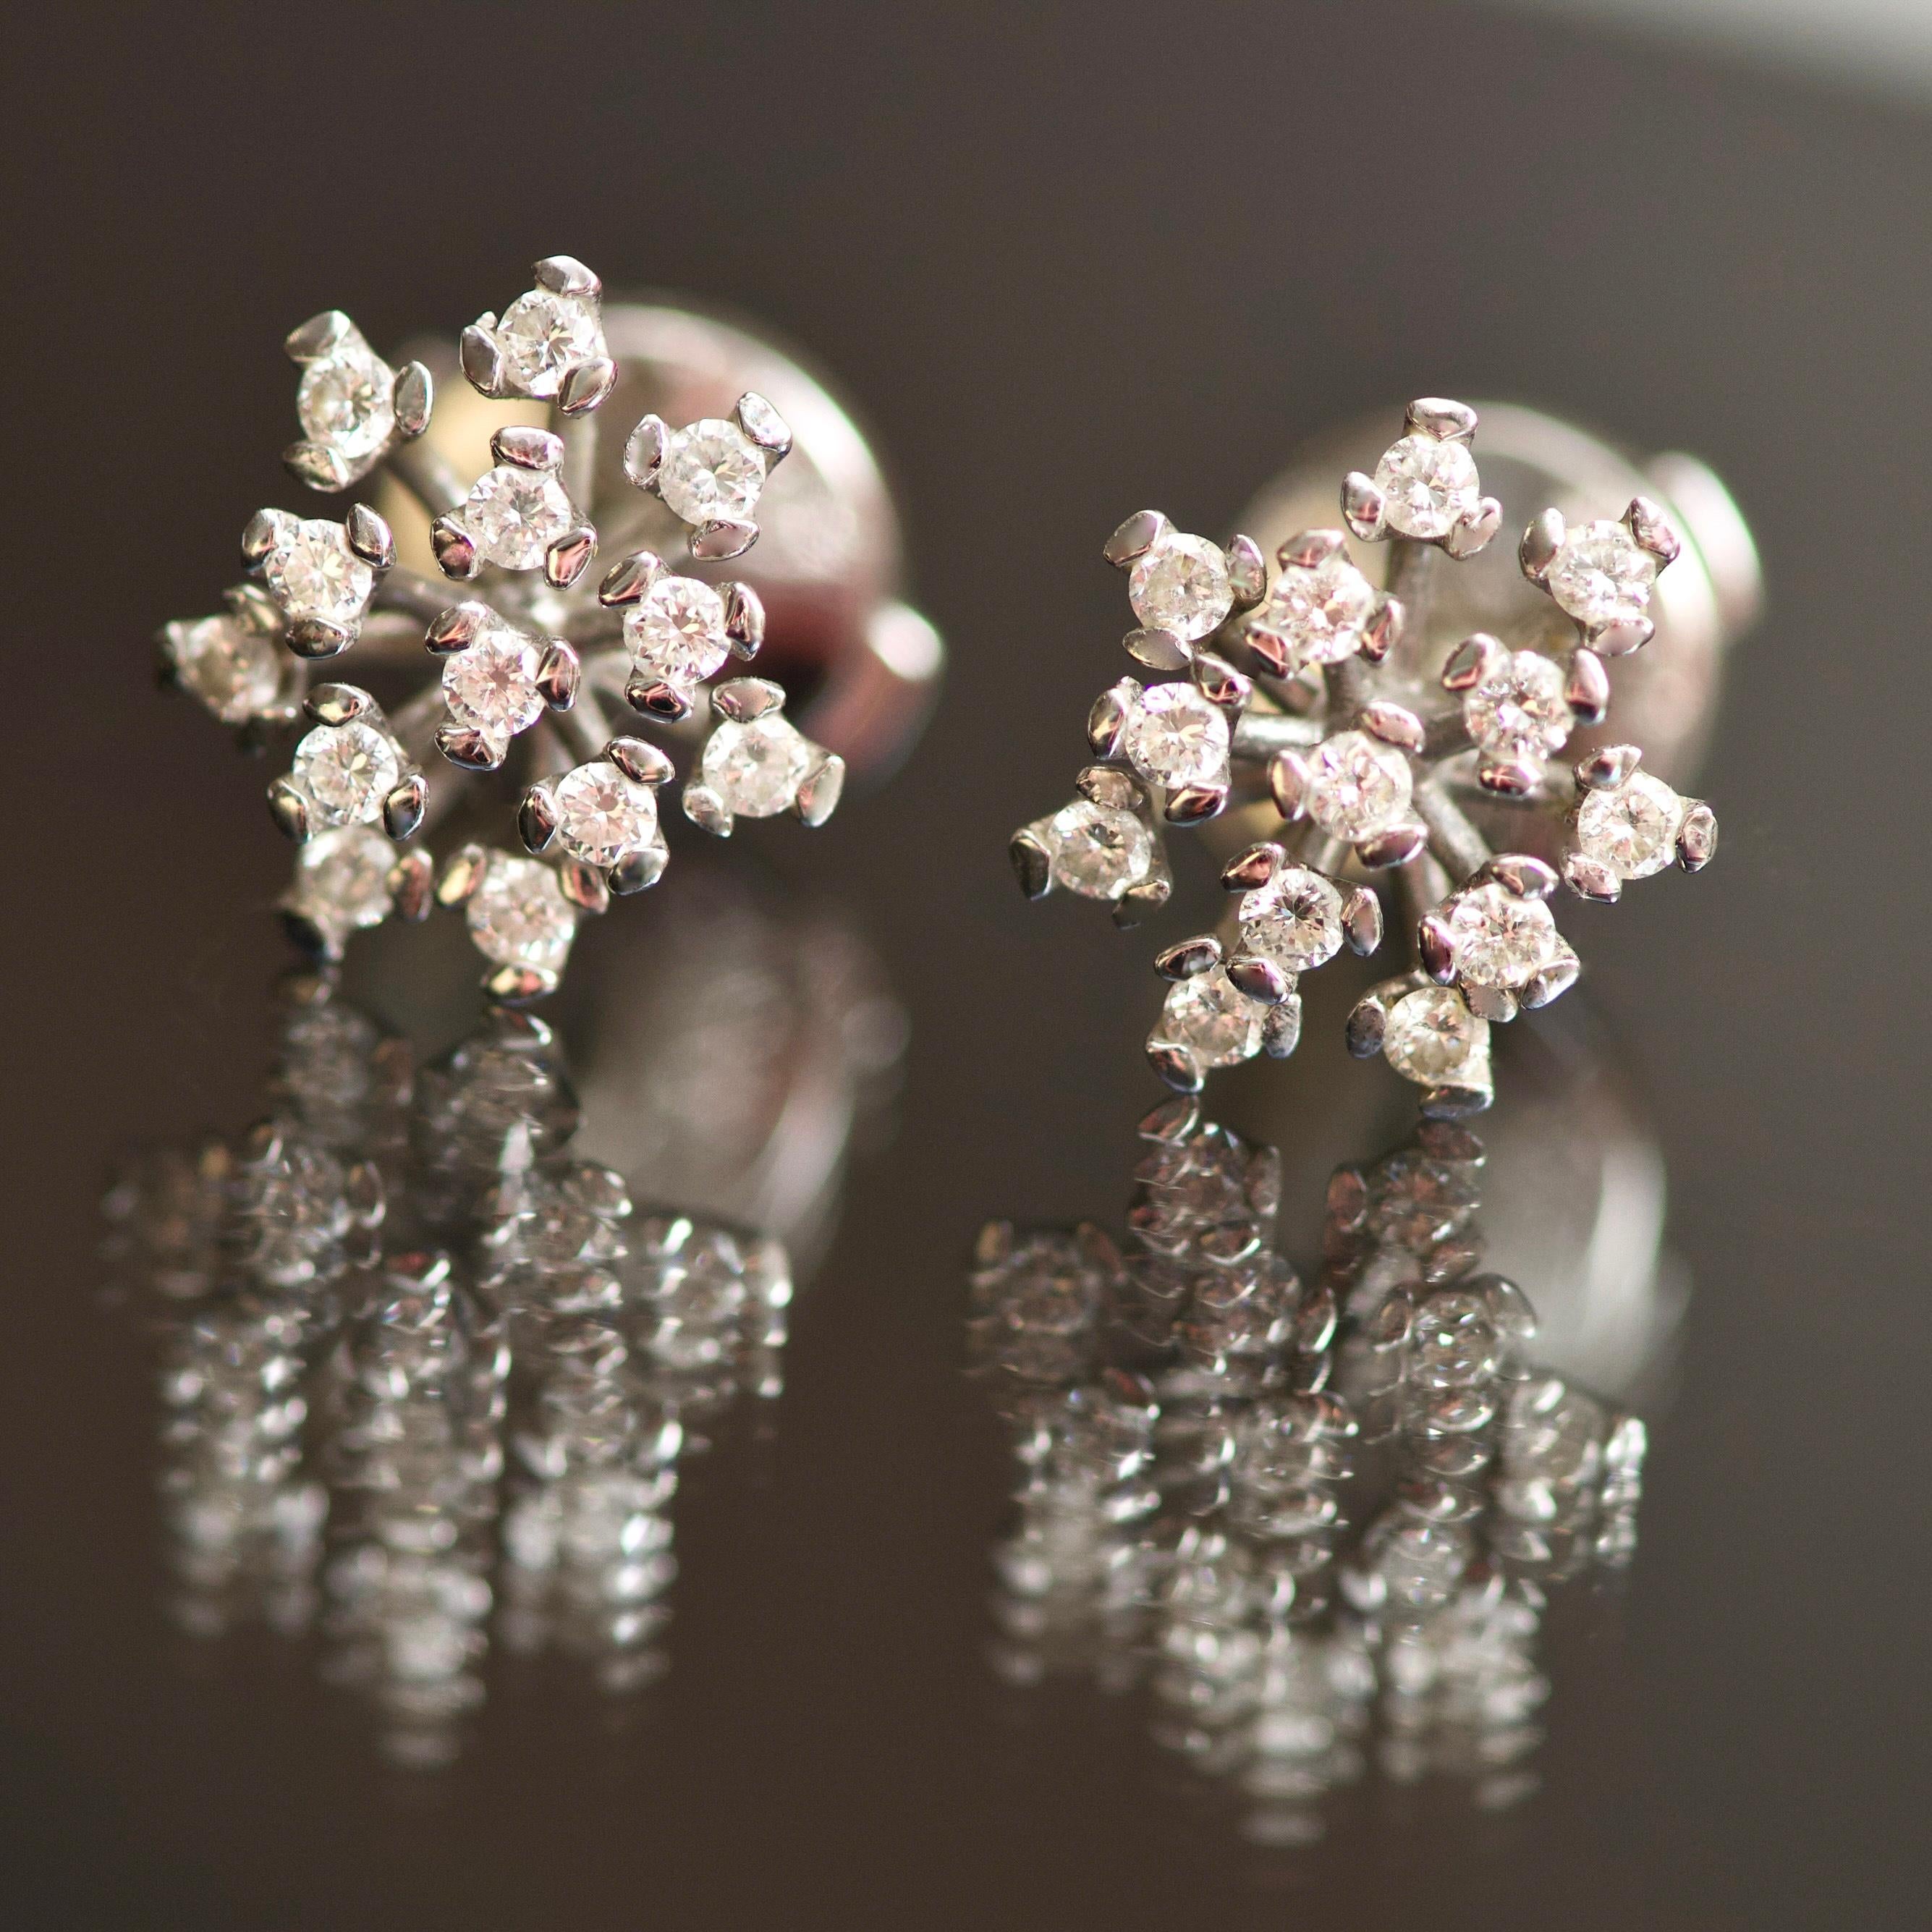 If you don't like usual stud earrings and want to find something special as an ideal jewelry for each and every day - these earrings are the best option for you.
These earrings are very light, very airy, you'll never want to take them off. 
Will